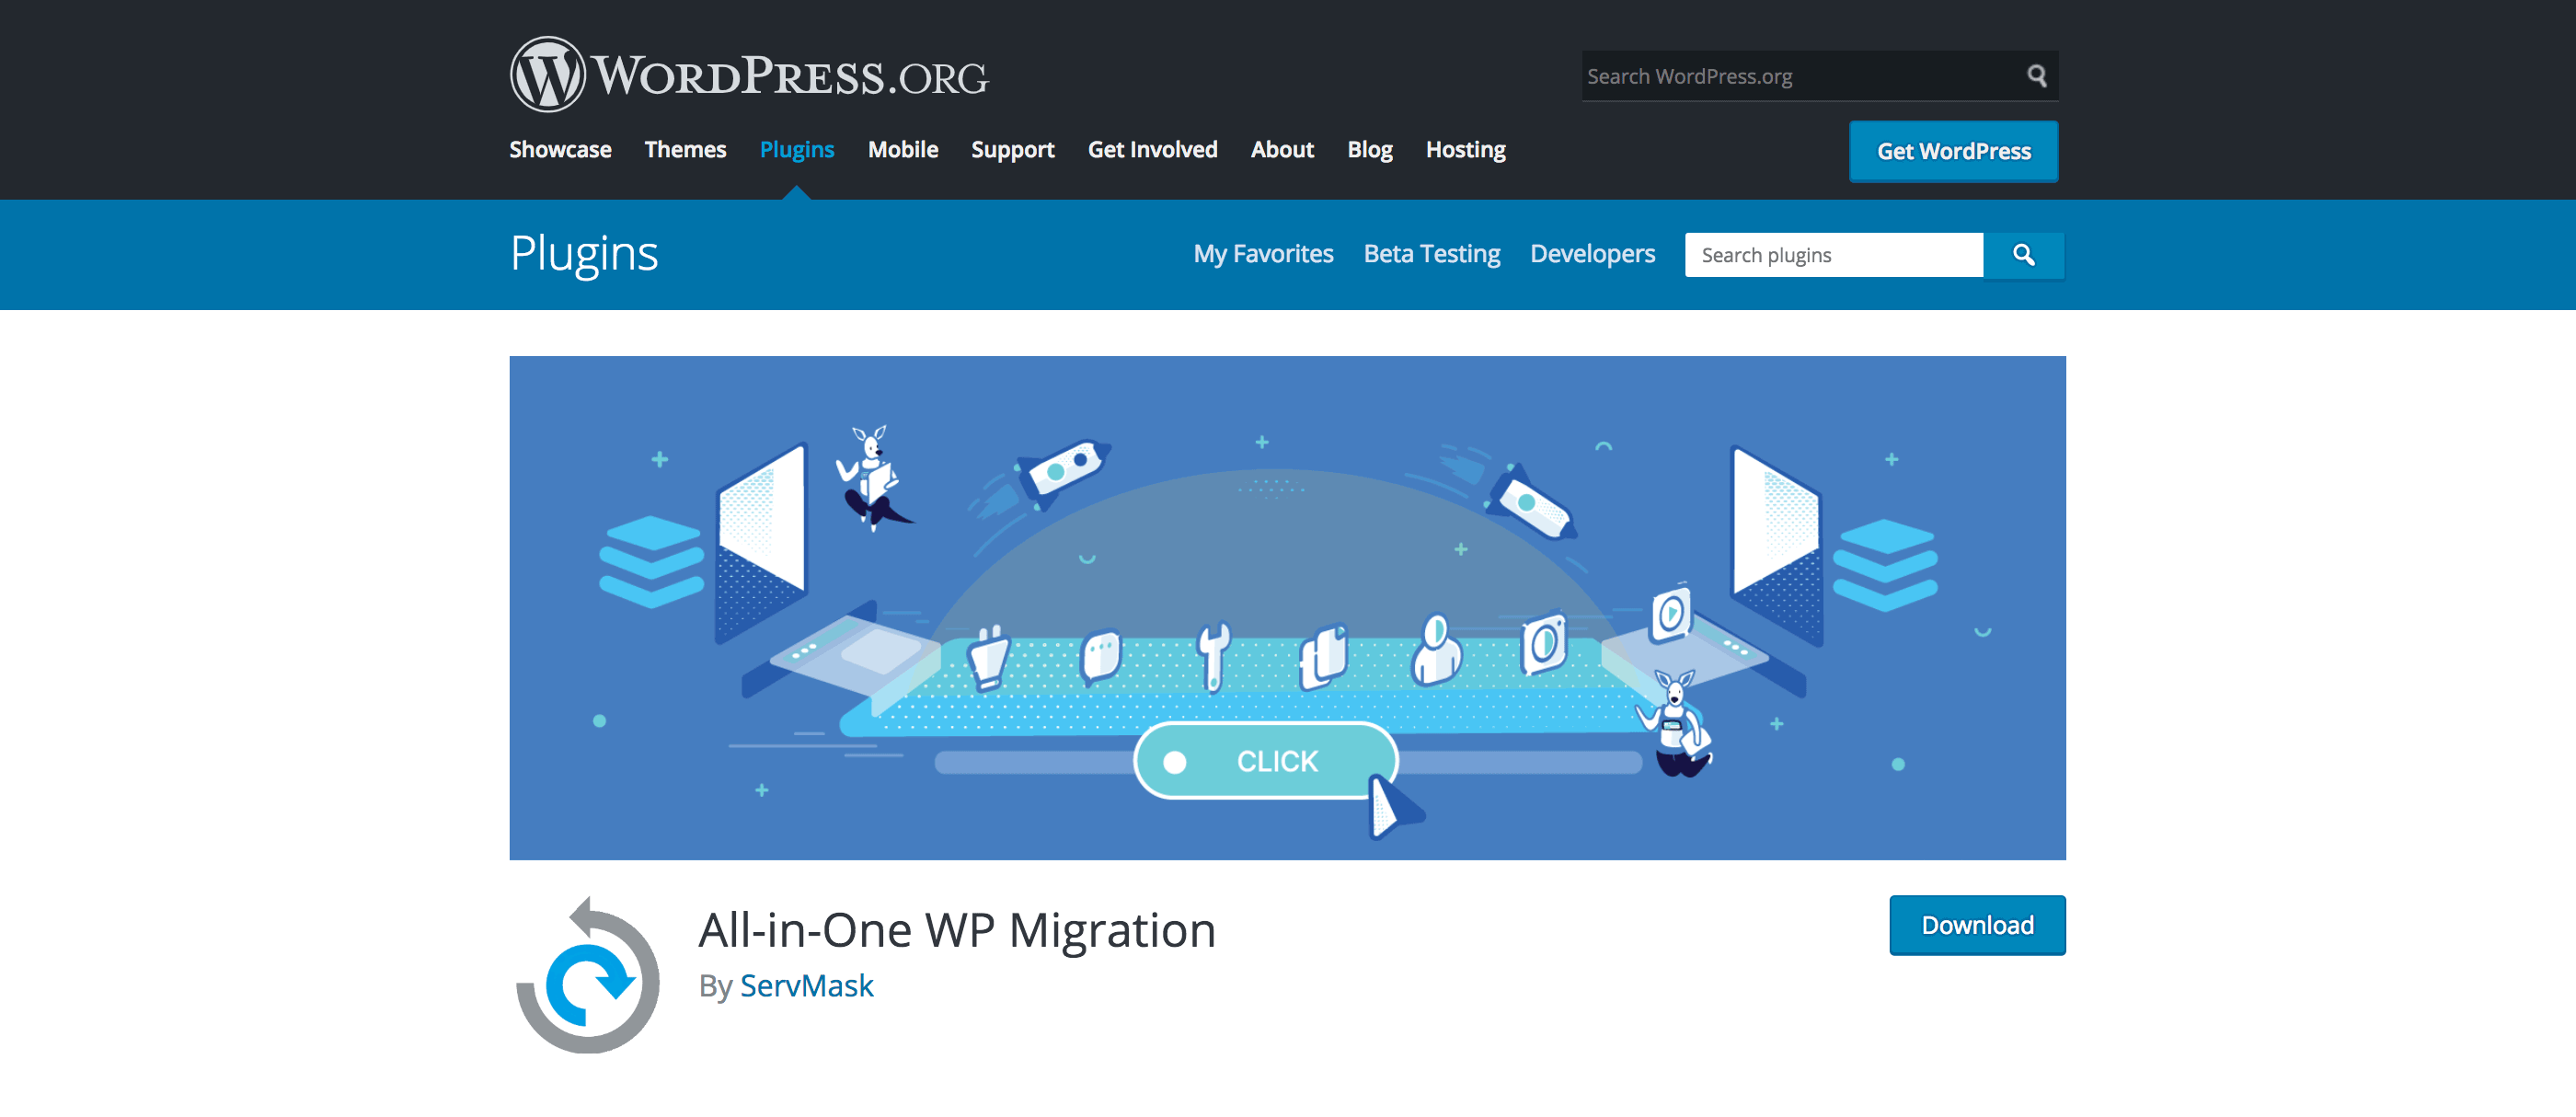 All-In-One WP Migration plugin homepage